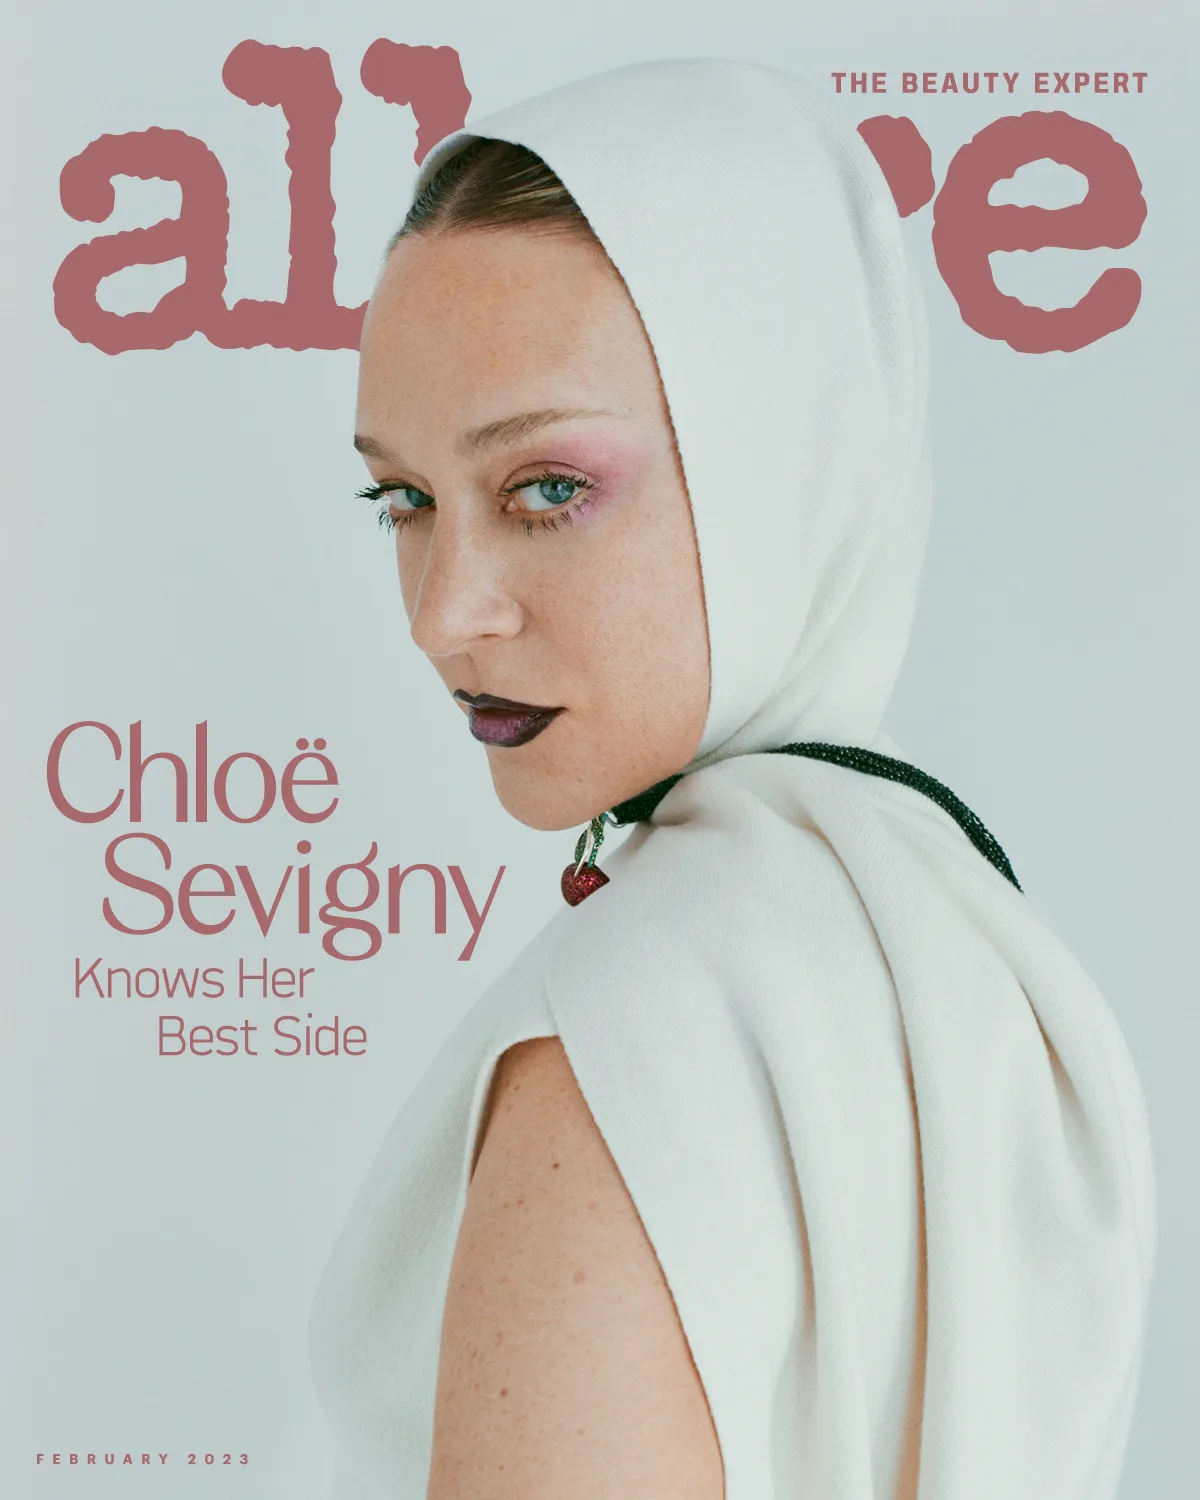 Chloë Sevigny covers Allure US March 2023 by Andrew Vowles